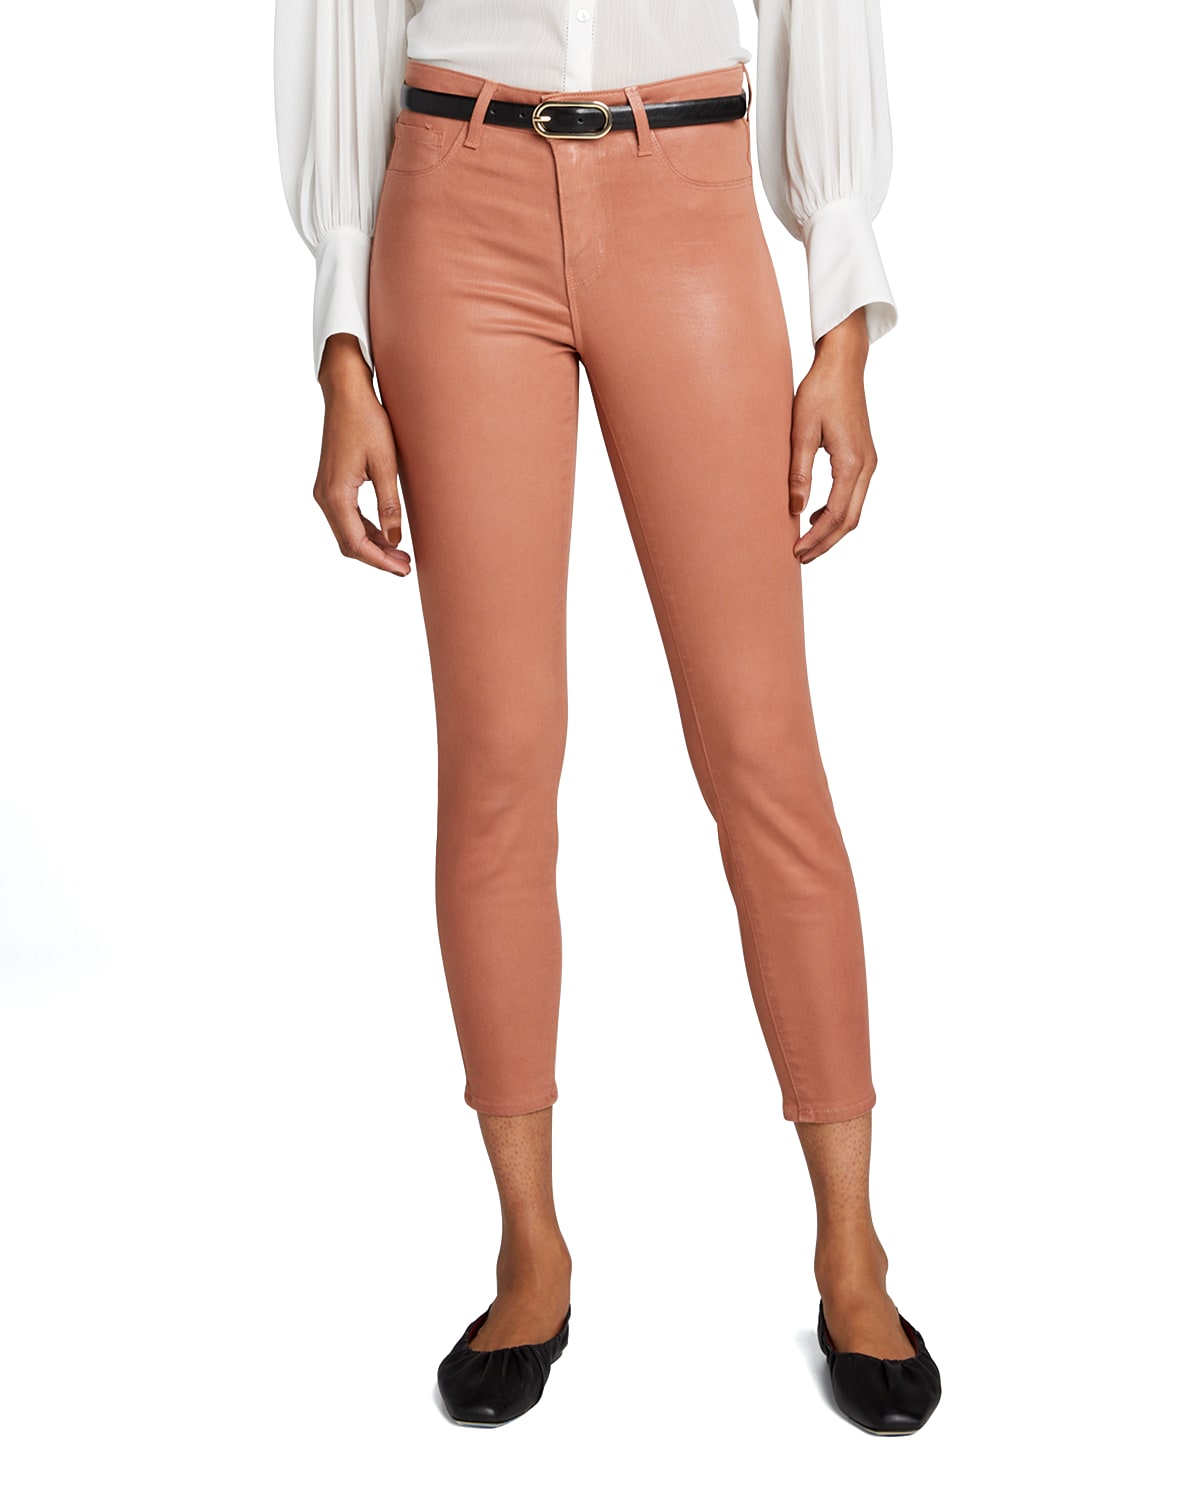 L'Agence Margot High-Rise Coated Skinny Jeans